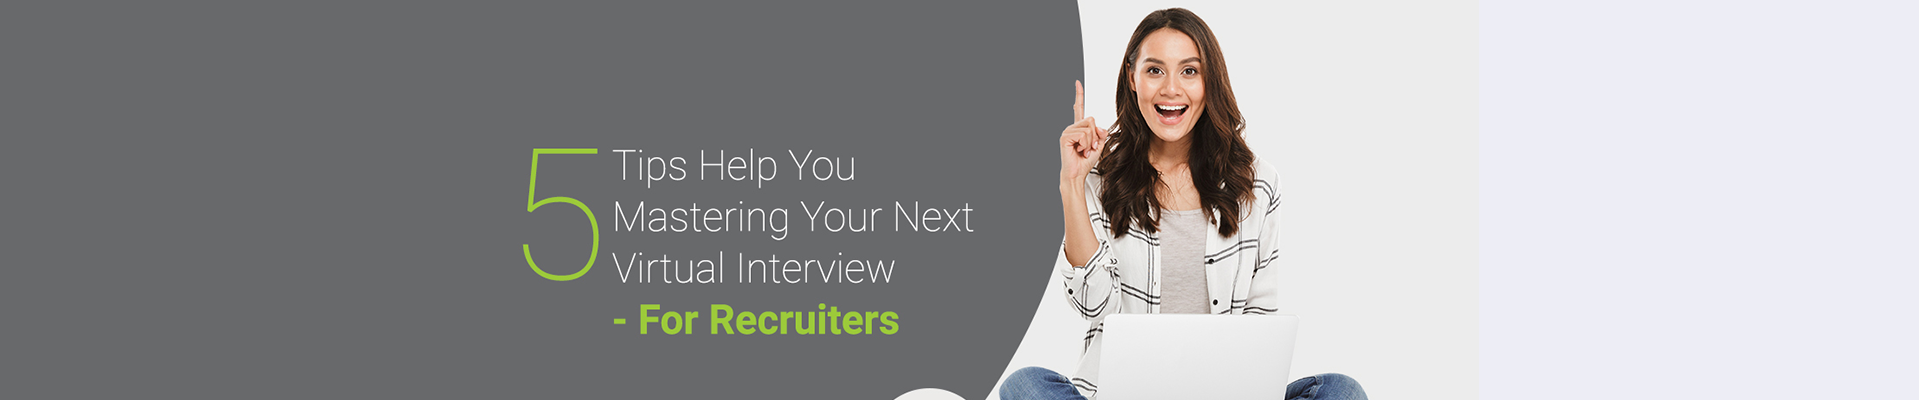 Virtual Interview tips